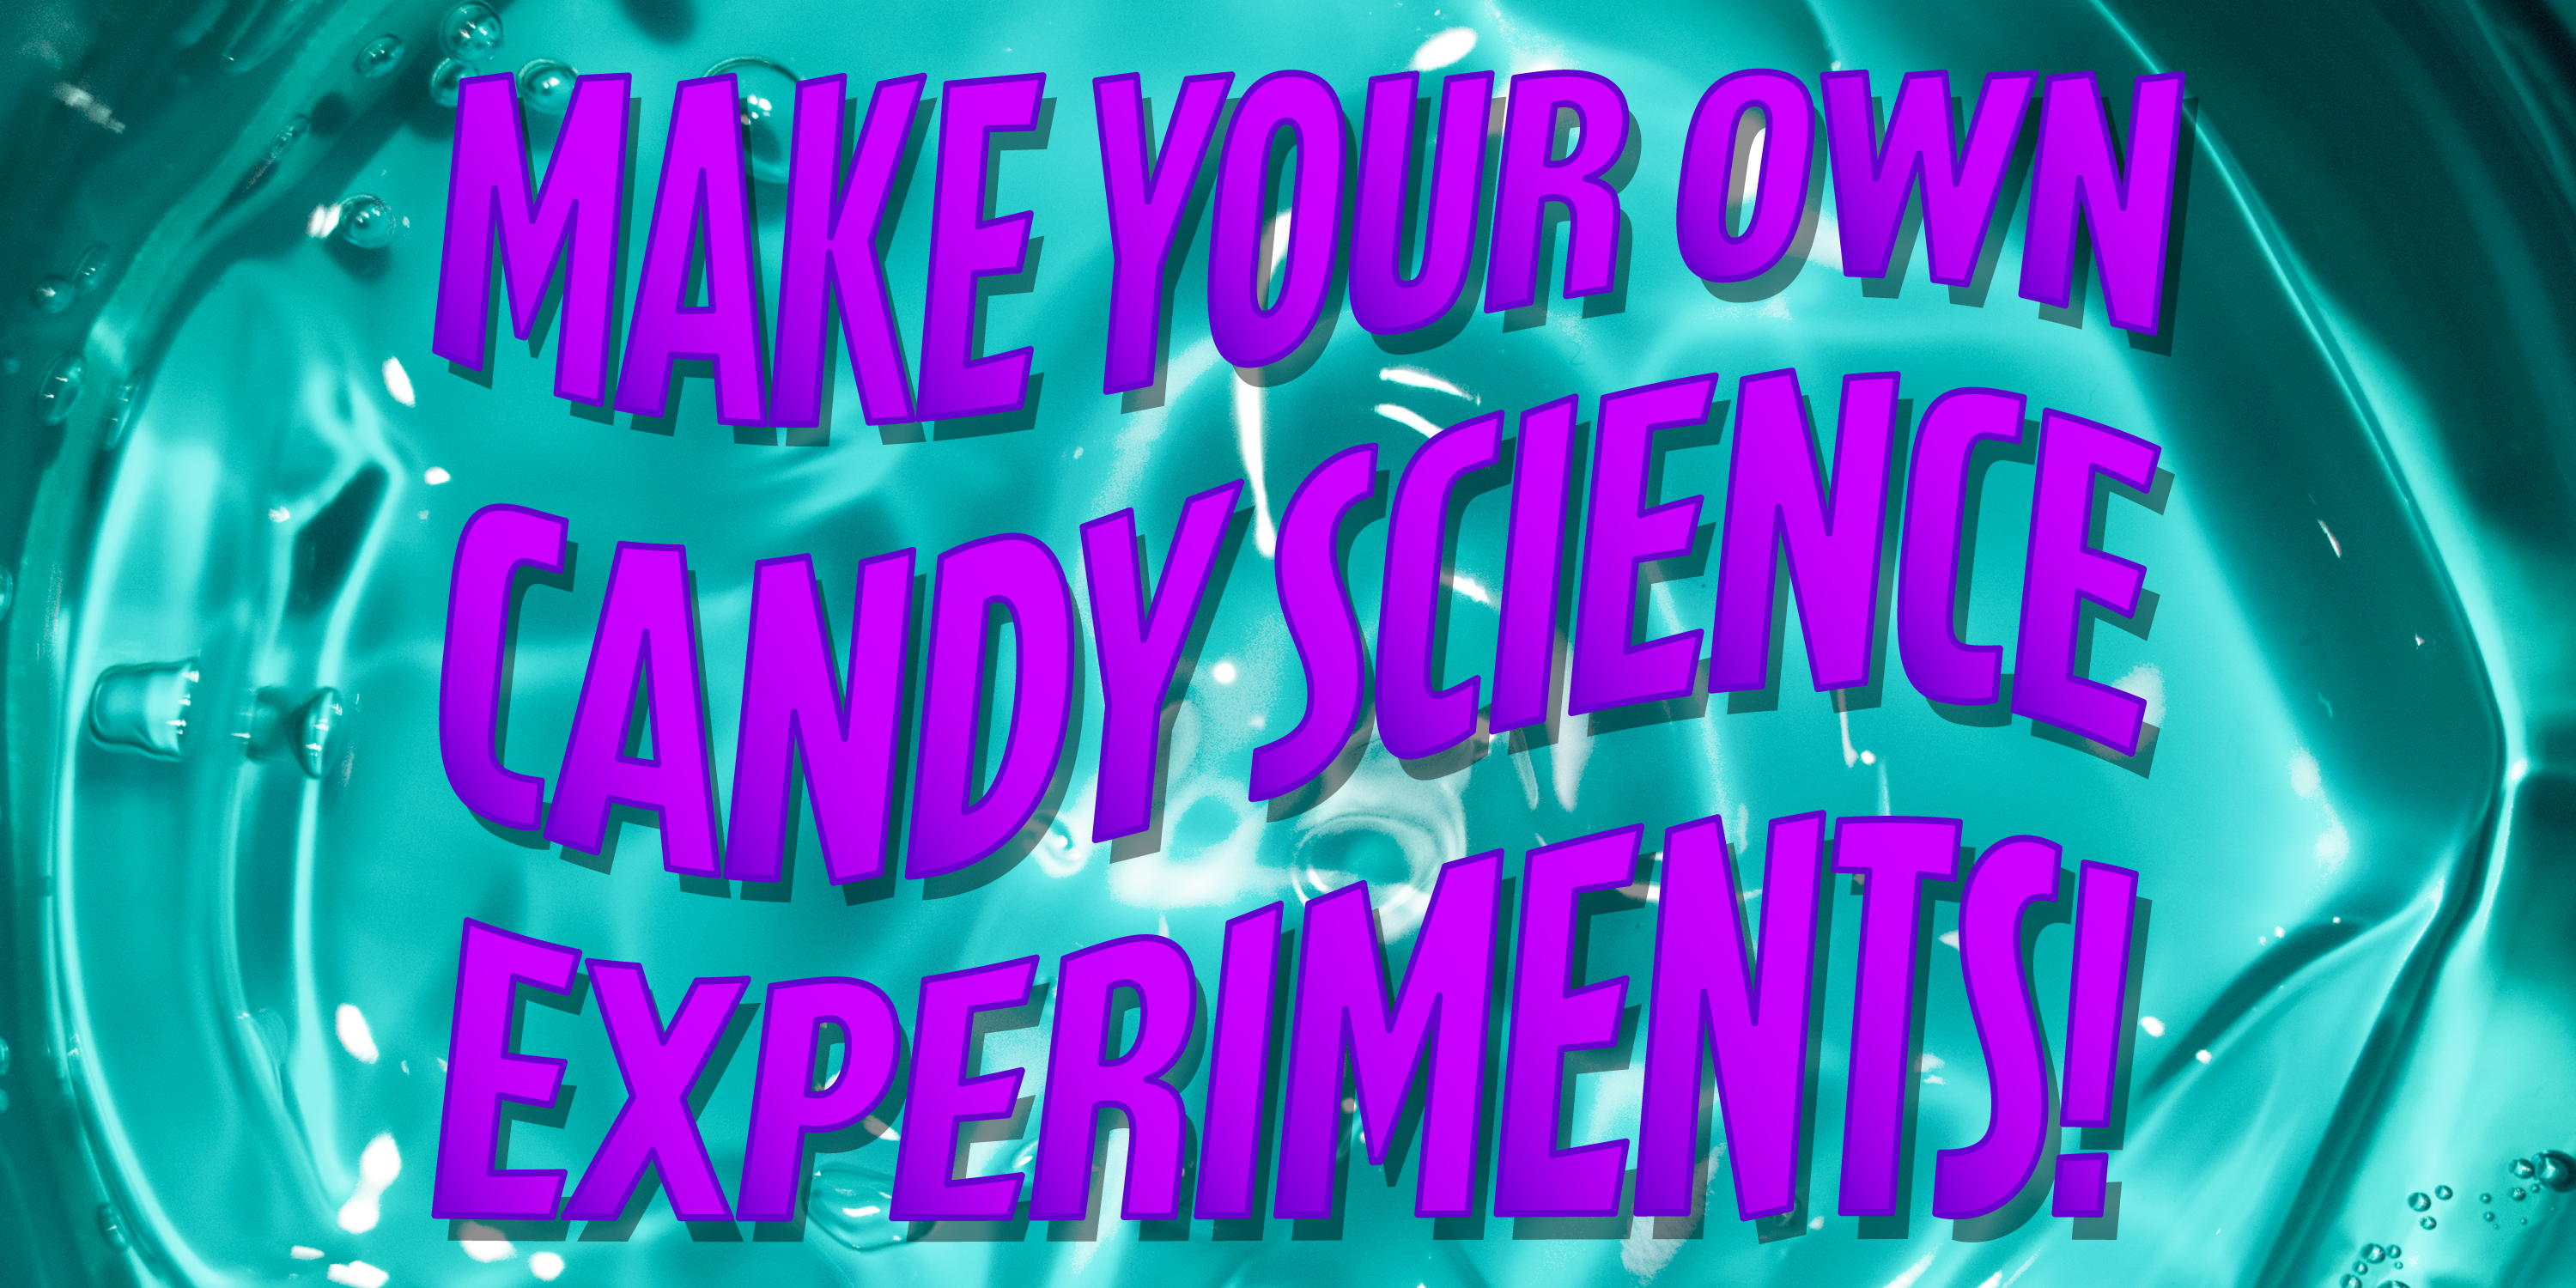 Make Your Own Candy Science Experiments!